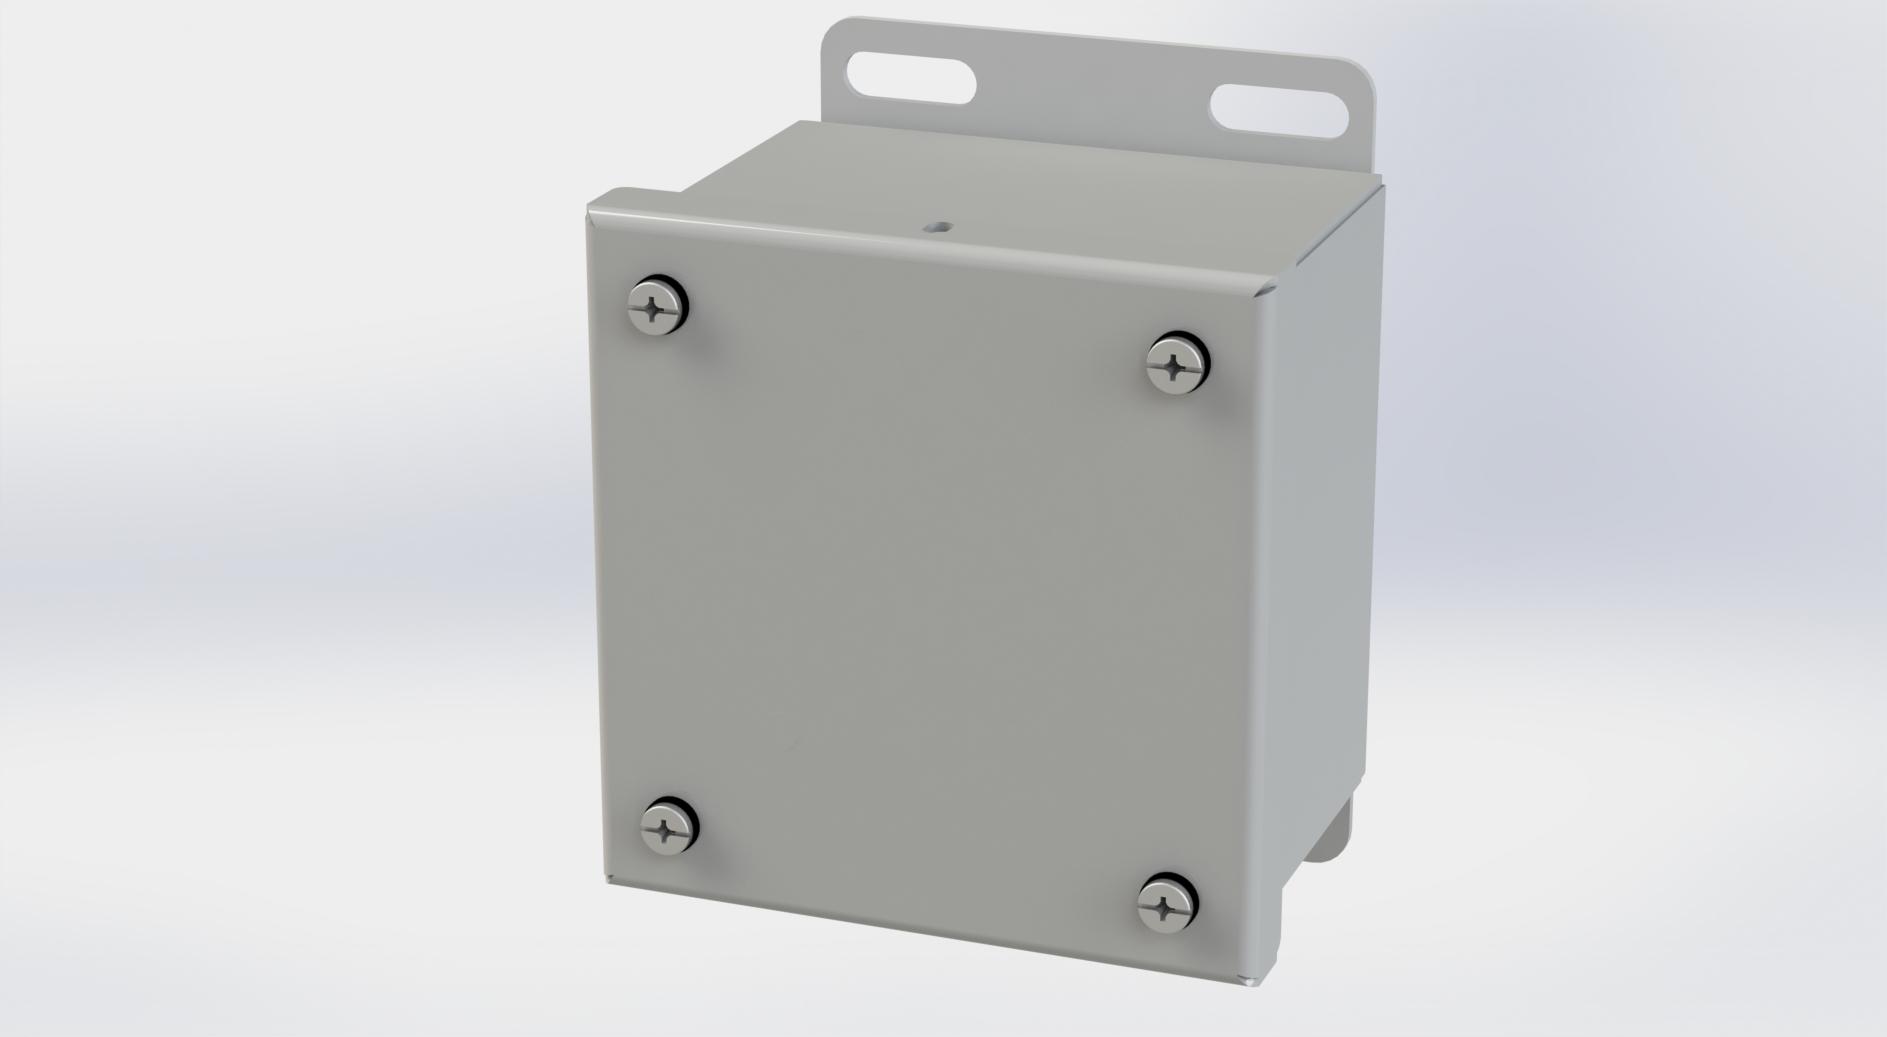 Saginaw Control SCE-404SC SC Enclosure, Height:4.13", Width:4.00", Depth:3.00", ANSI-61 gray powder coating inside and out.  Optional sub-panels are powder coated white.